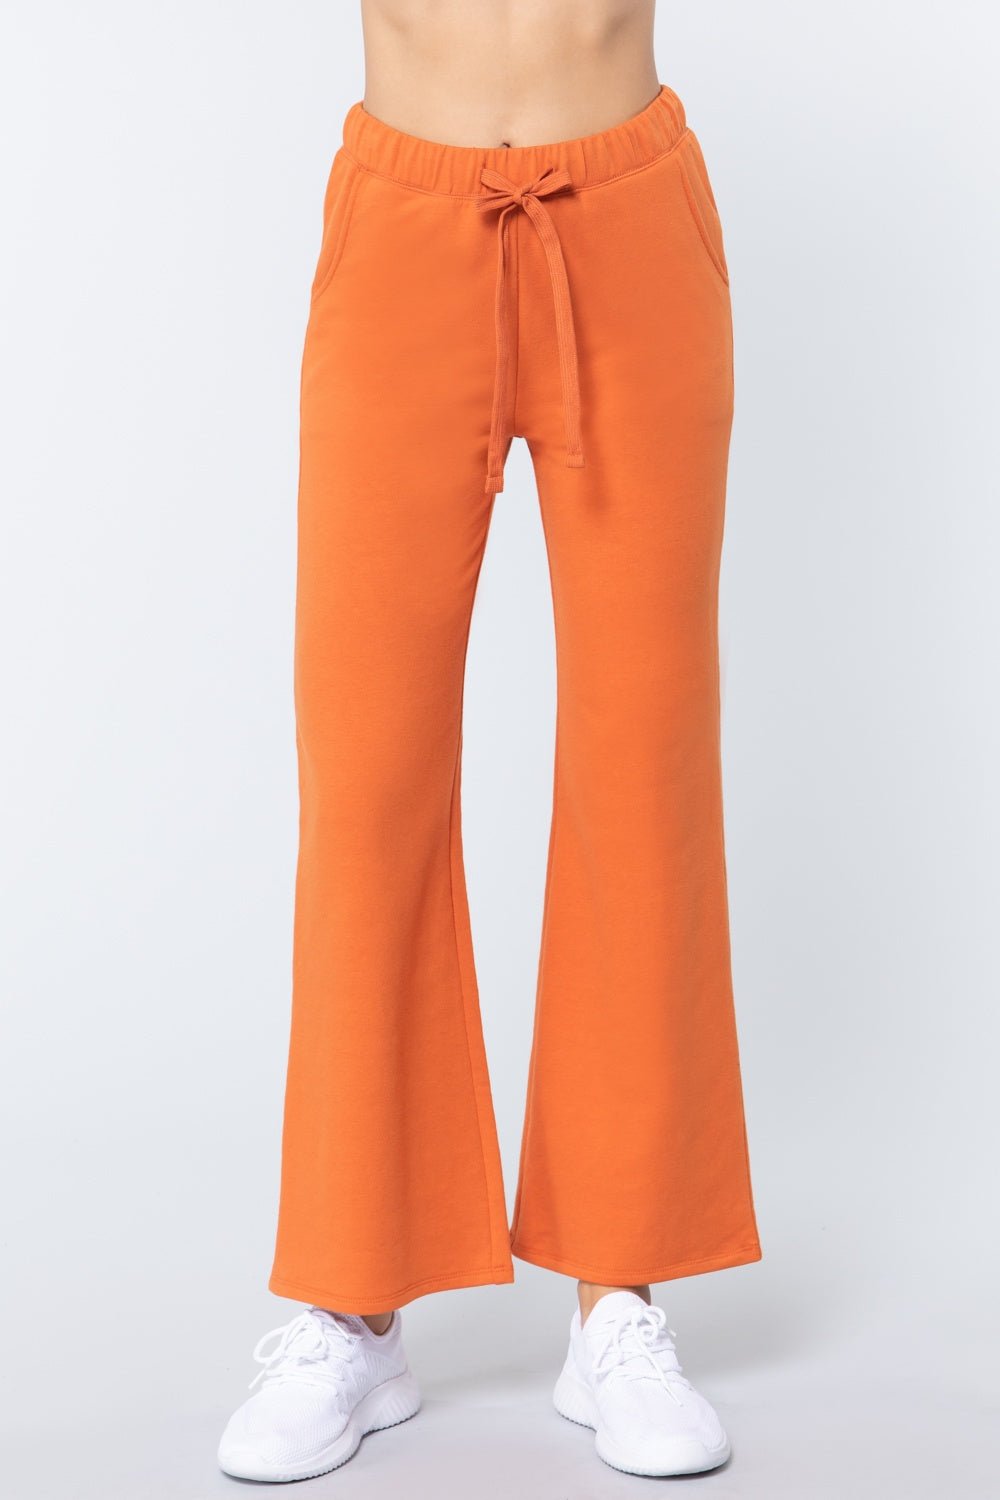 Our Best Cotton/Polyester/Spandex Blend French Terry Long Pants (Orange)